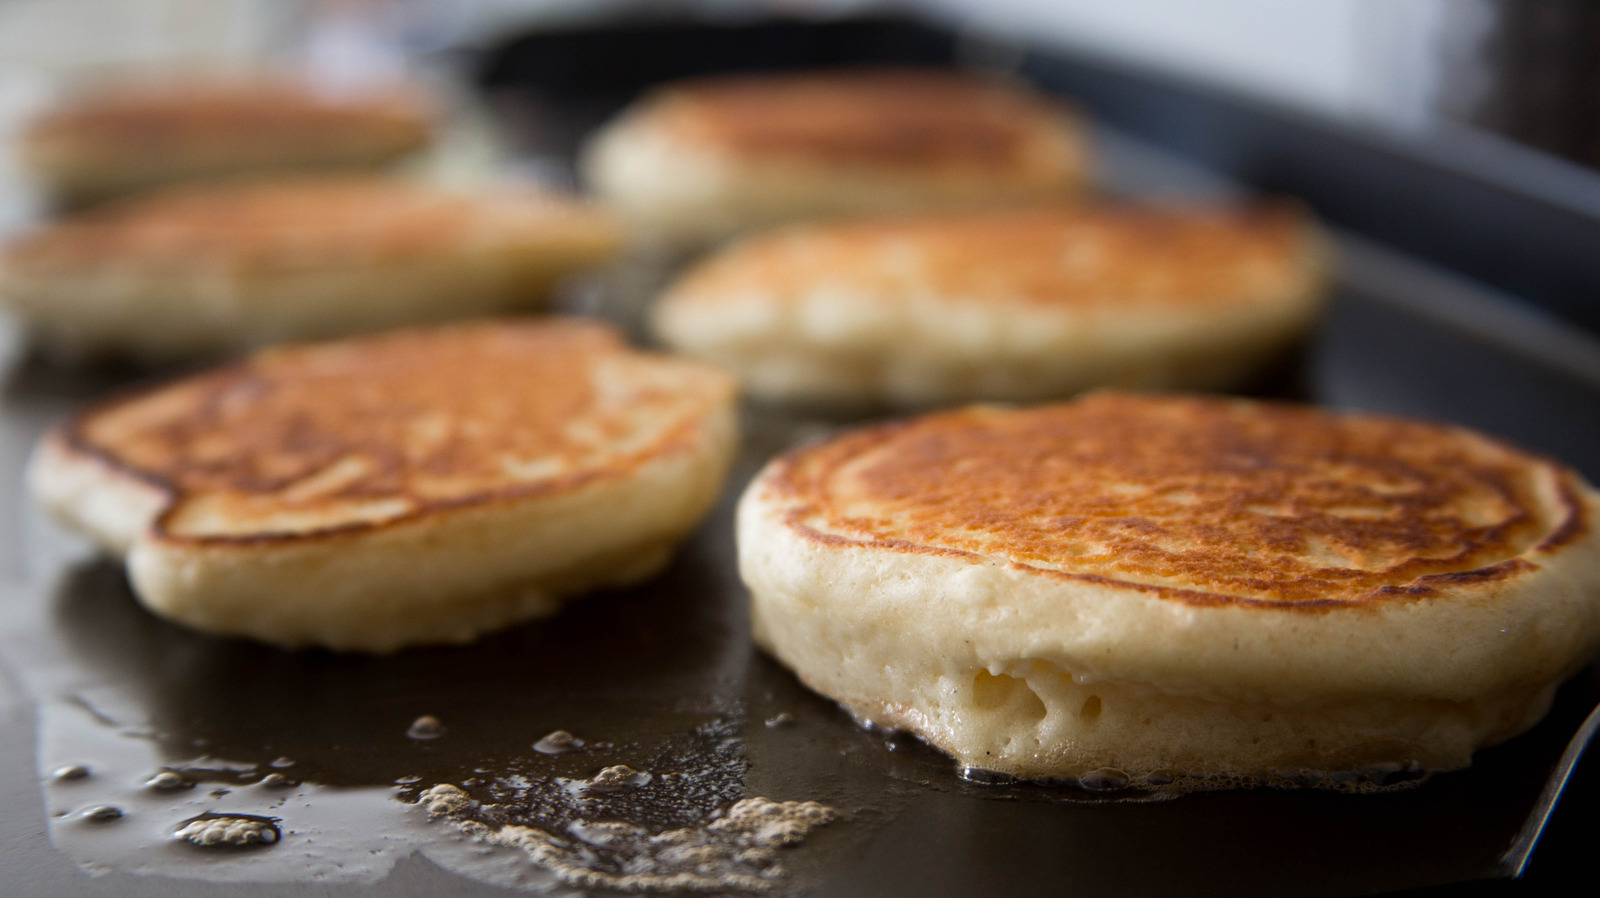 https://www.mashed.com/img/gallery/for-pancakes-this-griddle-stands-above-the-rest/l-intro-1628540723.jpg